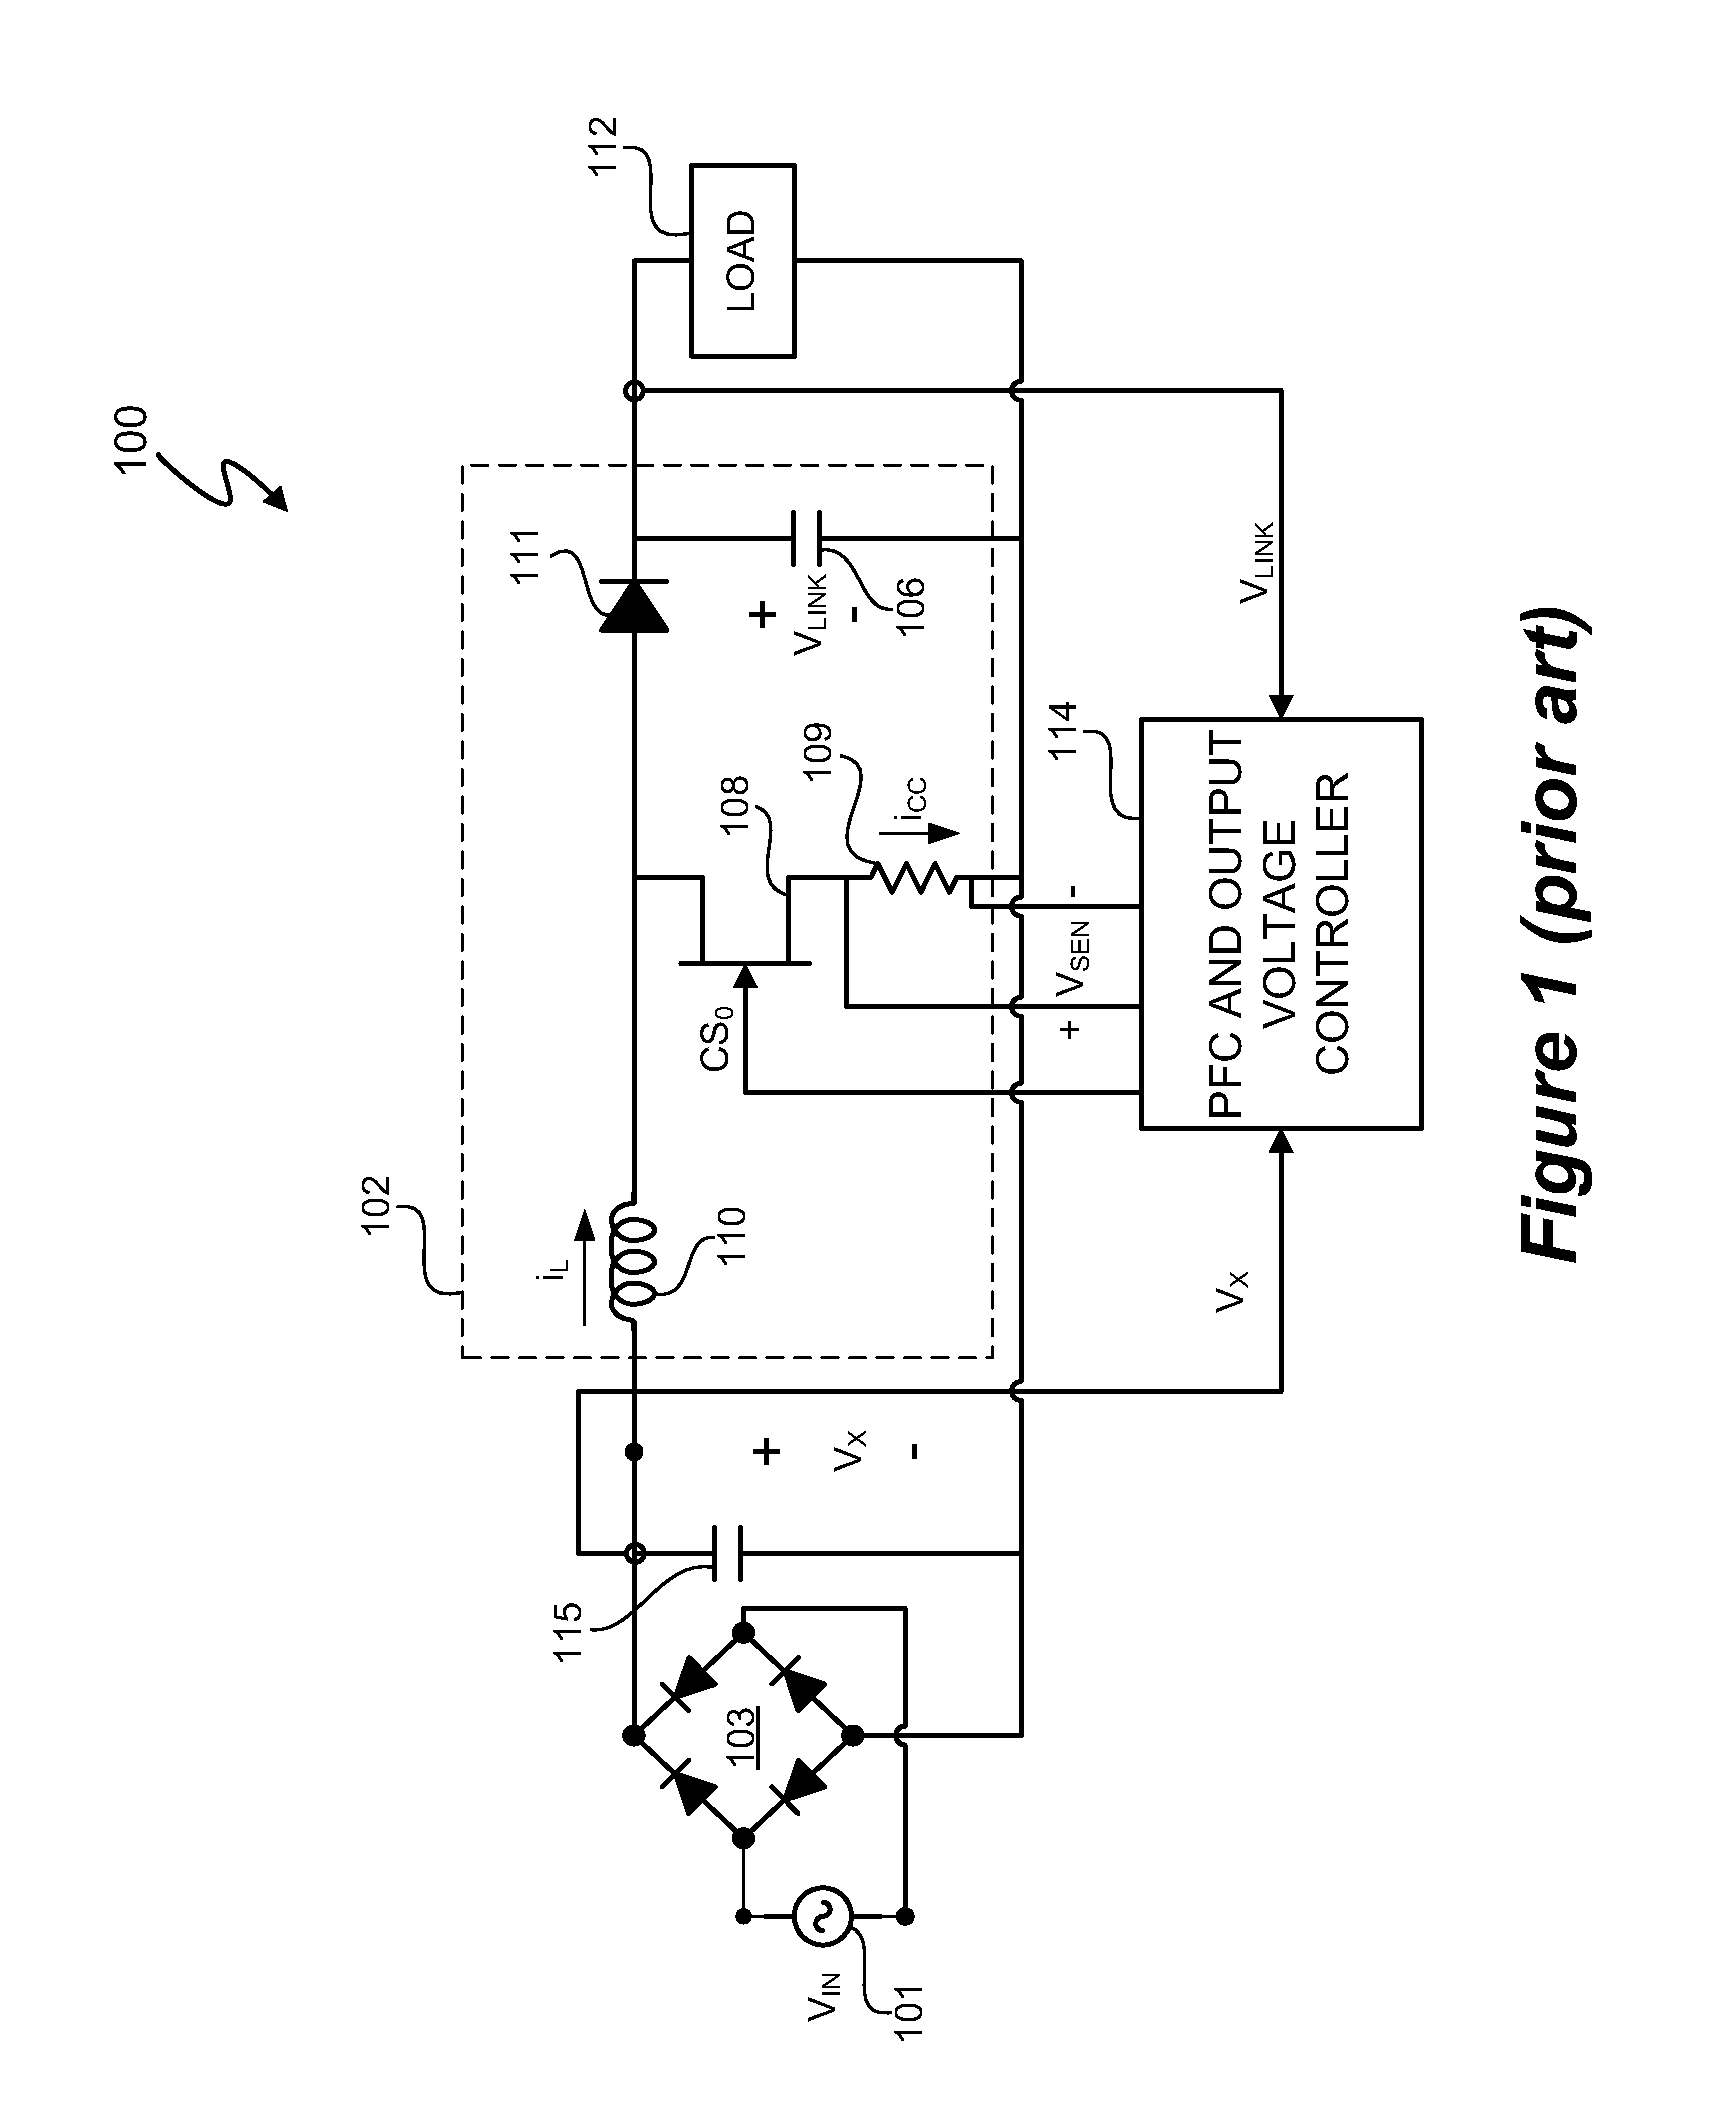 Cascode configured switching using at least one low breakdown voltage internal, integrated circuit switch to control at least one high breakdown voltage external switch